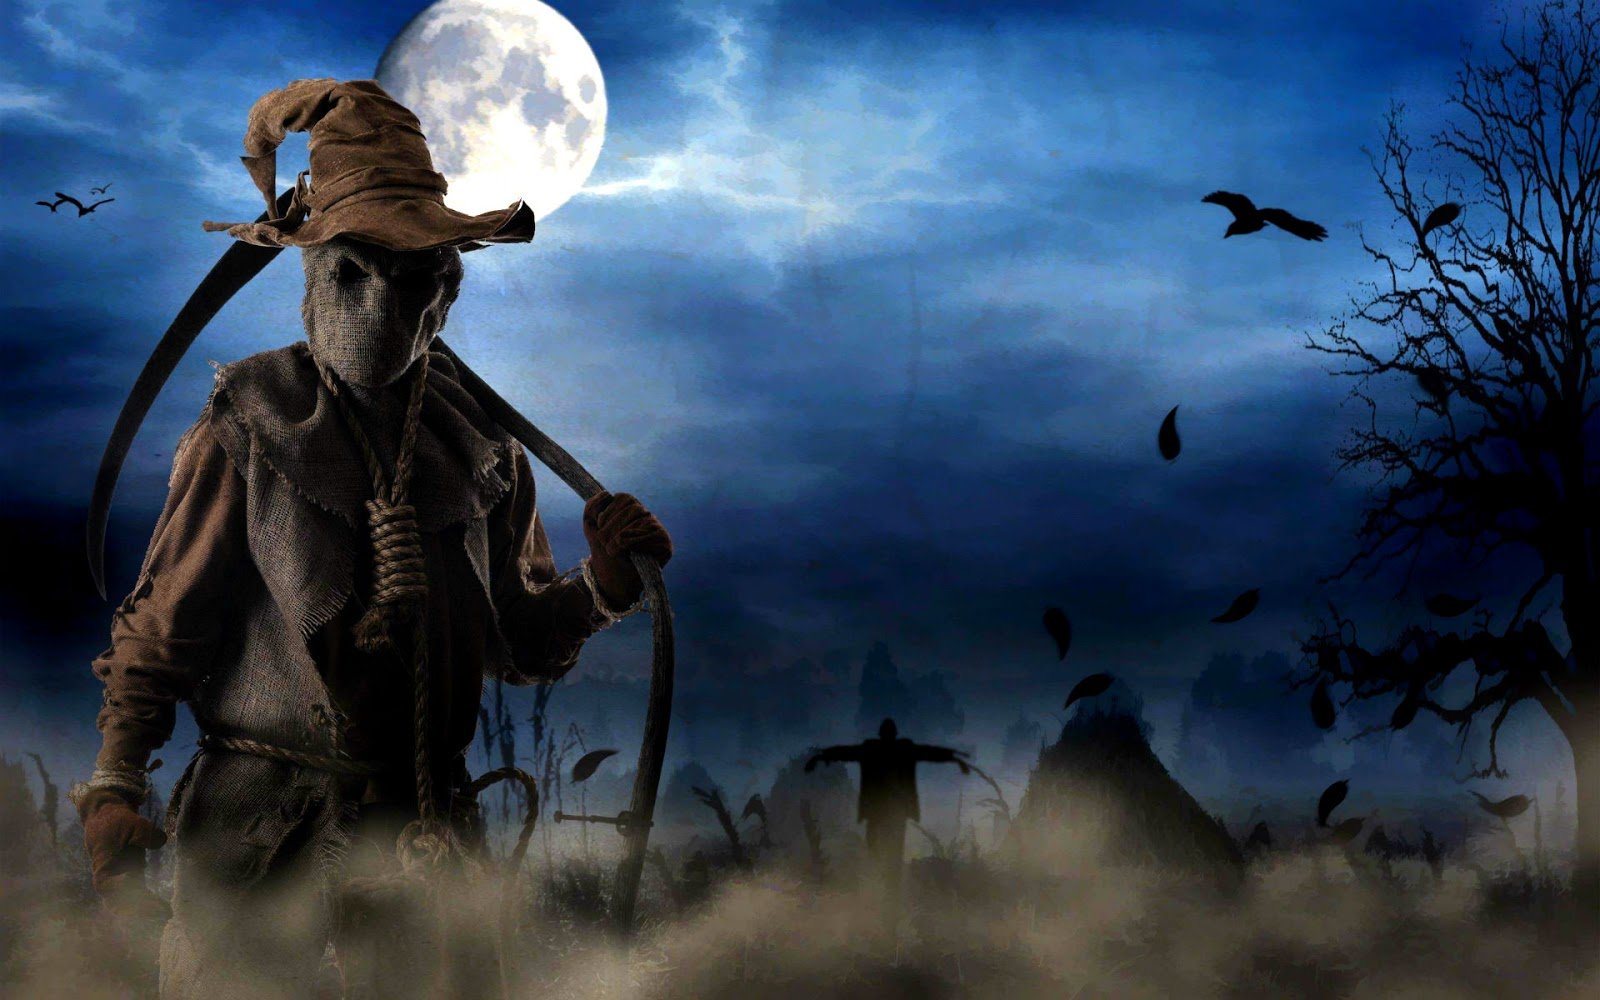  festivals horror latest scary spooky images pictures wallpapers